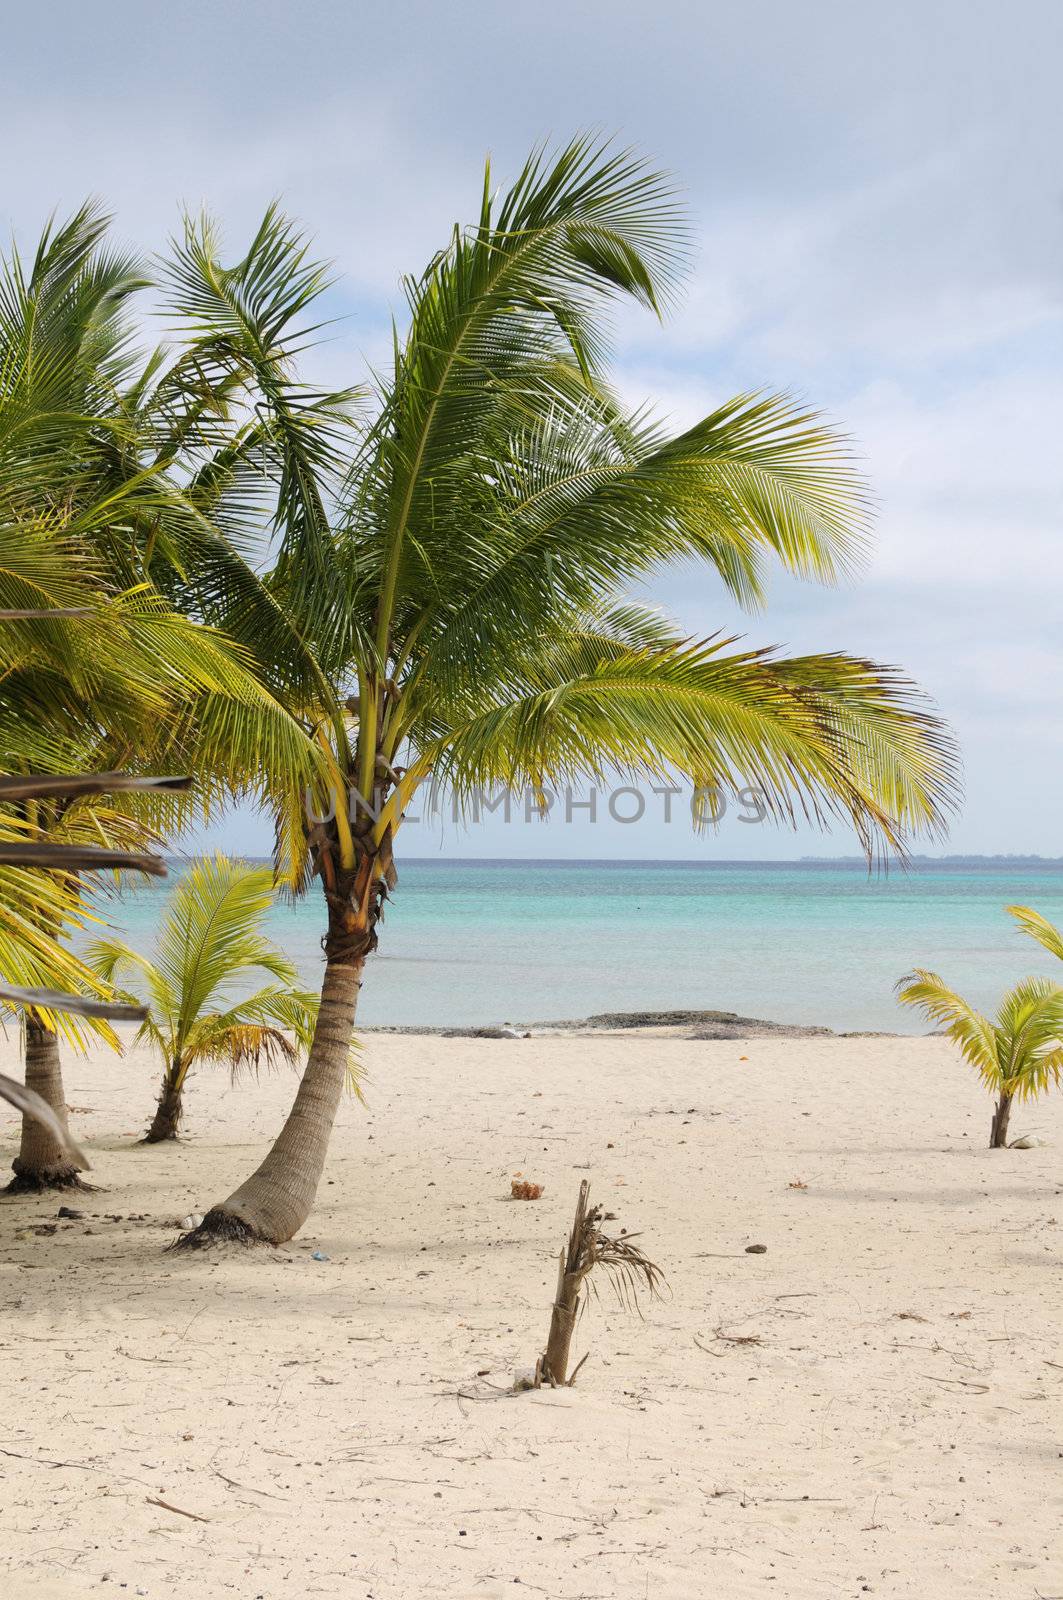 A view of tropical beach with coconut palm trees